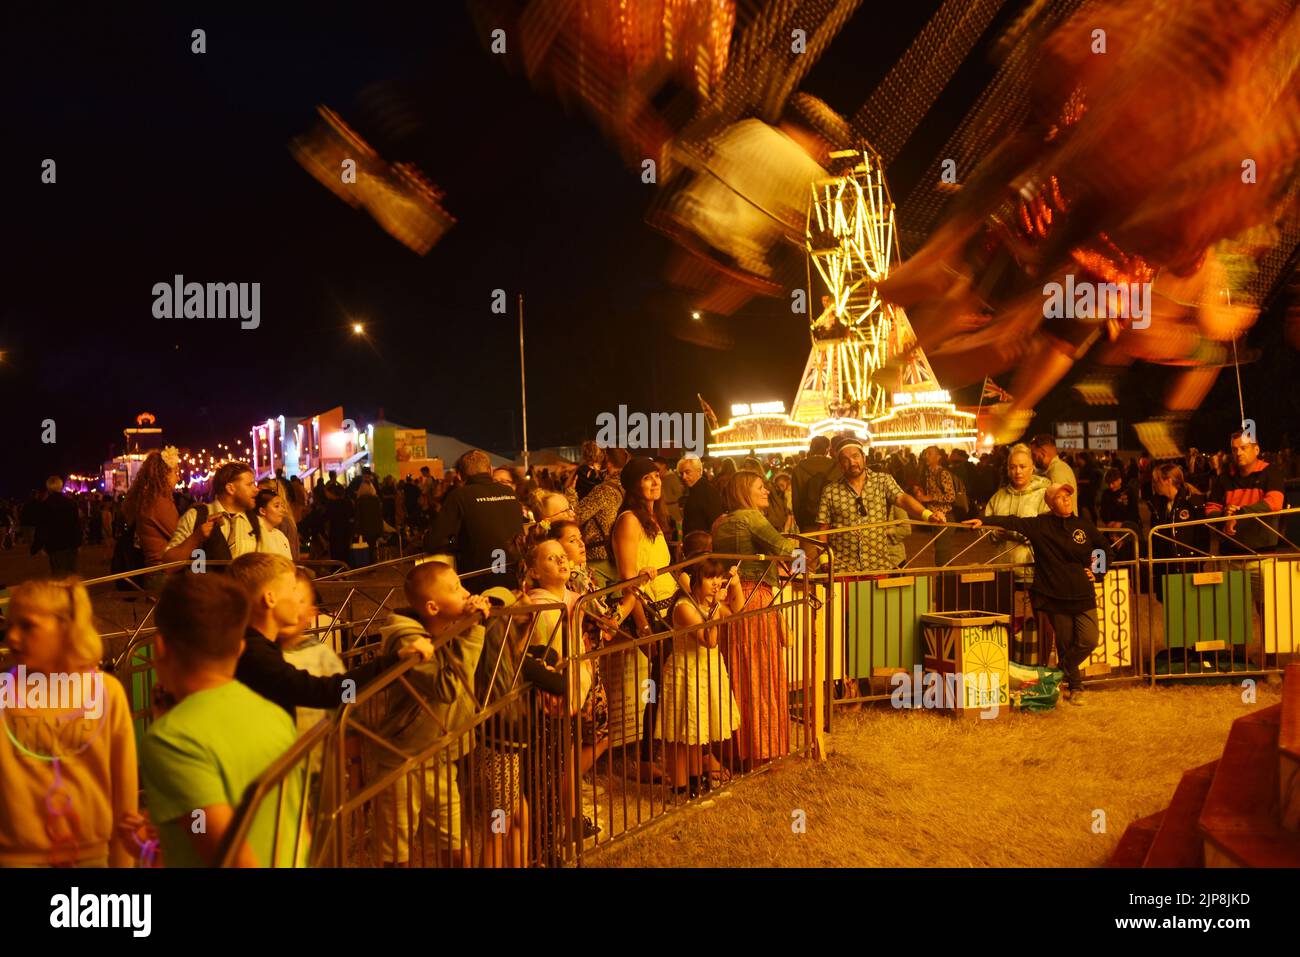 Crowds watch carousel swing ride at Camp Bestival, Lulworth Castle and Estate, Dorset July 28 - 31 2022 Stock Photo